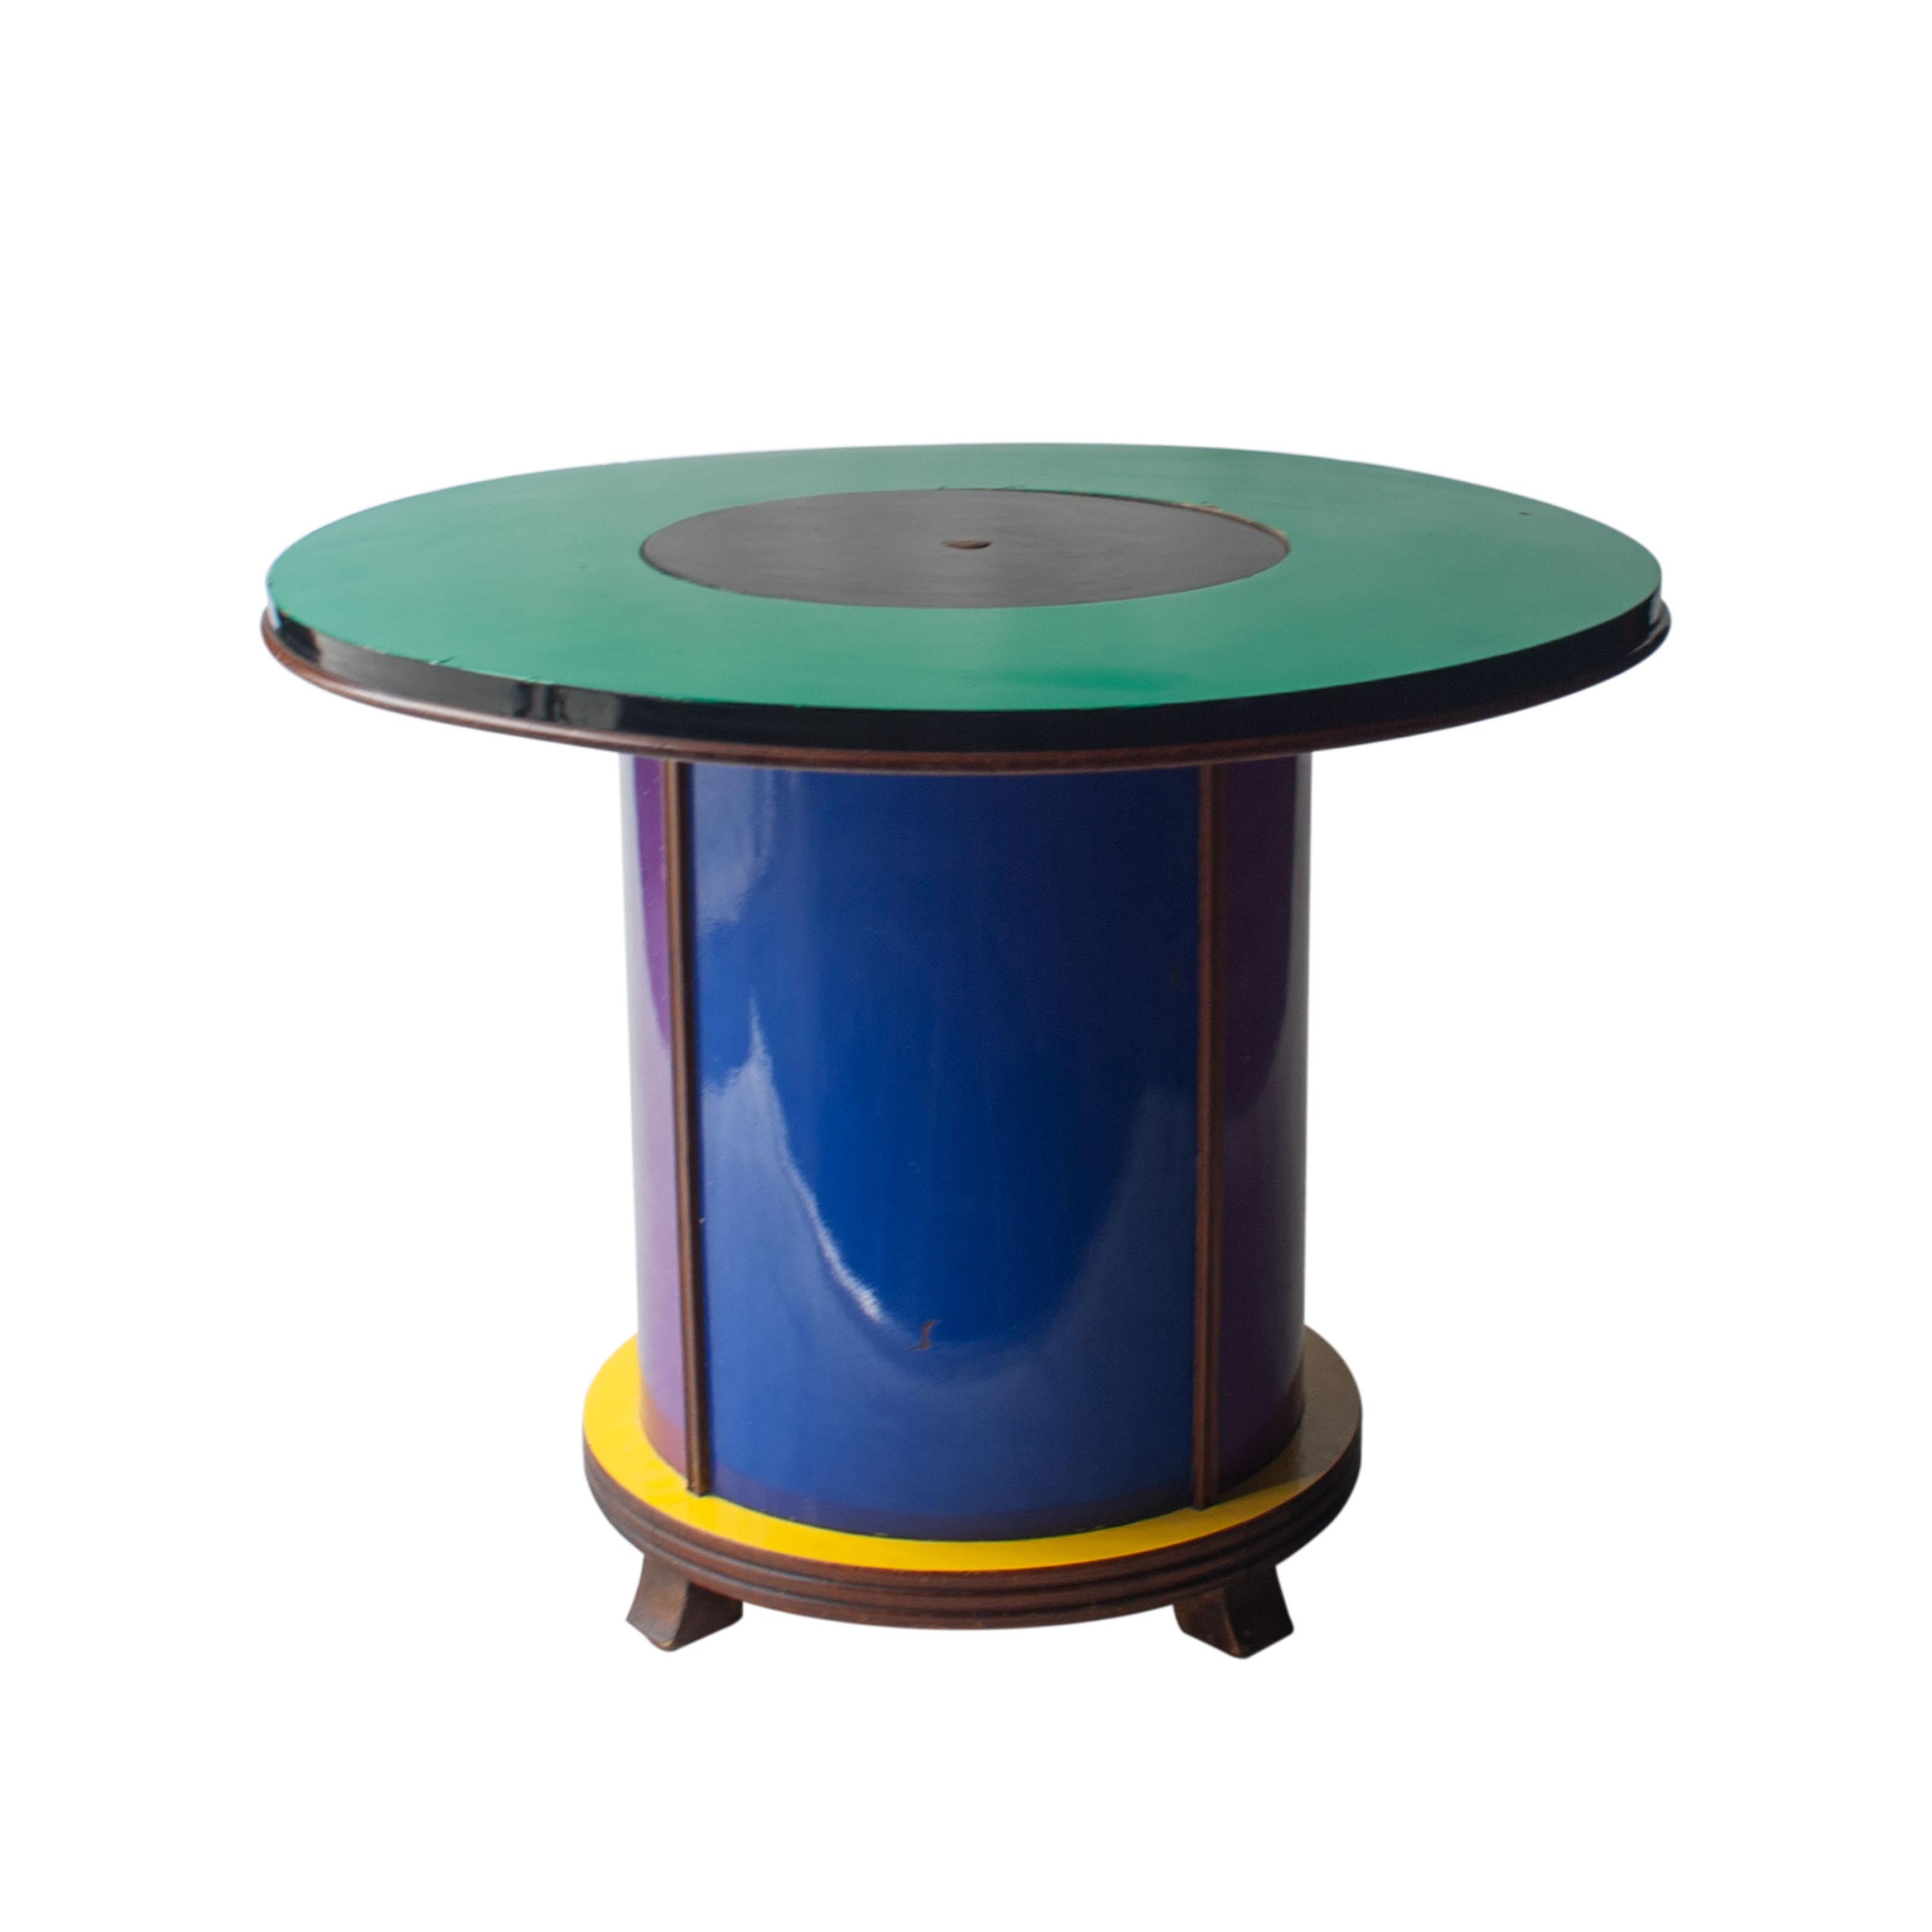 Circular cabinet bar with wooden structure covered in purple, yellow, red, green, black and white melamine with central mechanism that lifts a bar cabinet. Designed by Doro Cundo and edited by Singer & Sons in Italy in the 1980s.